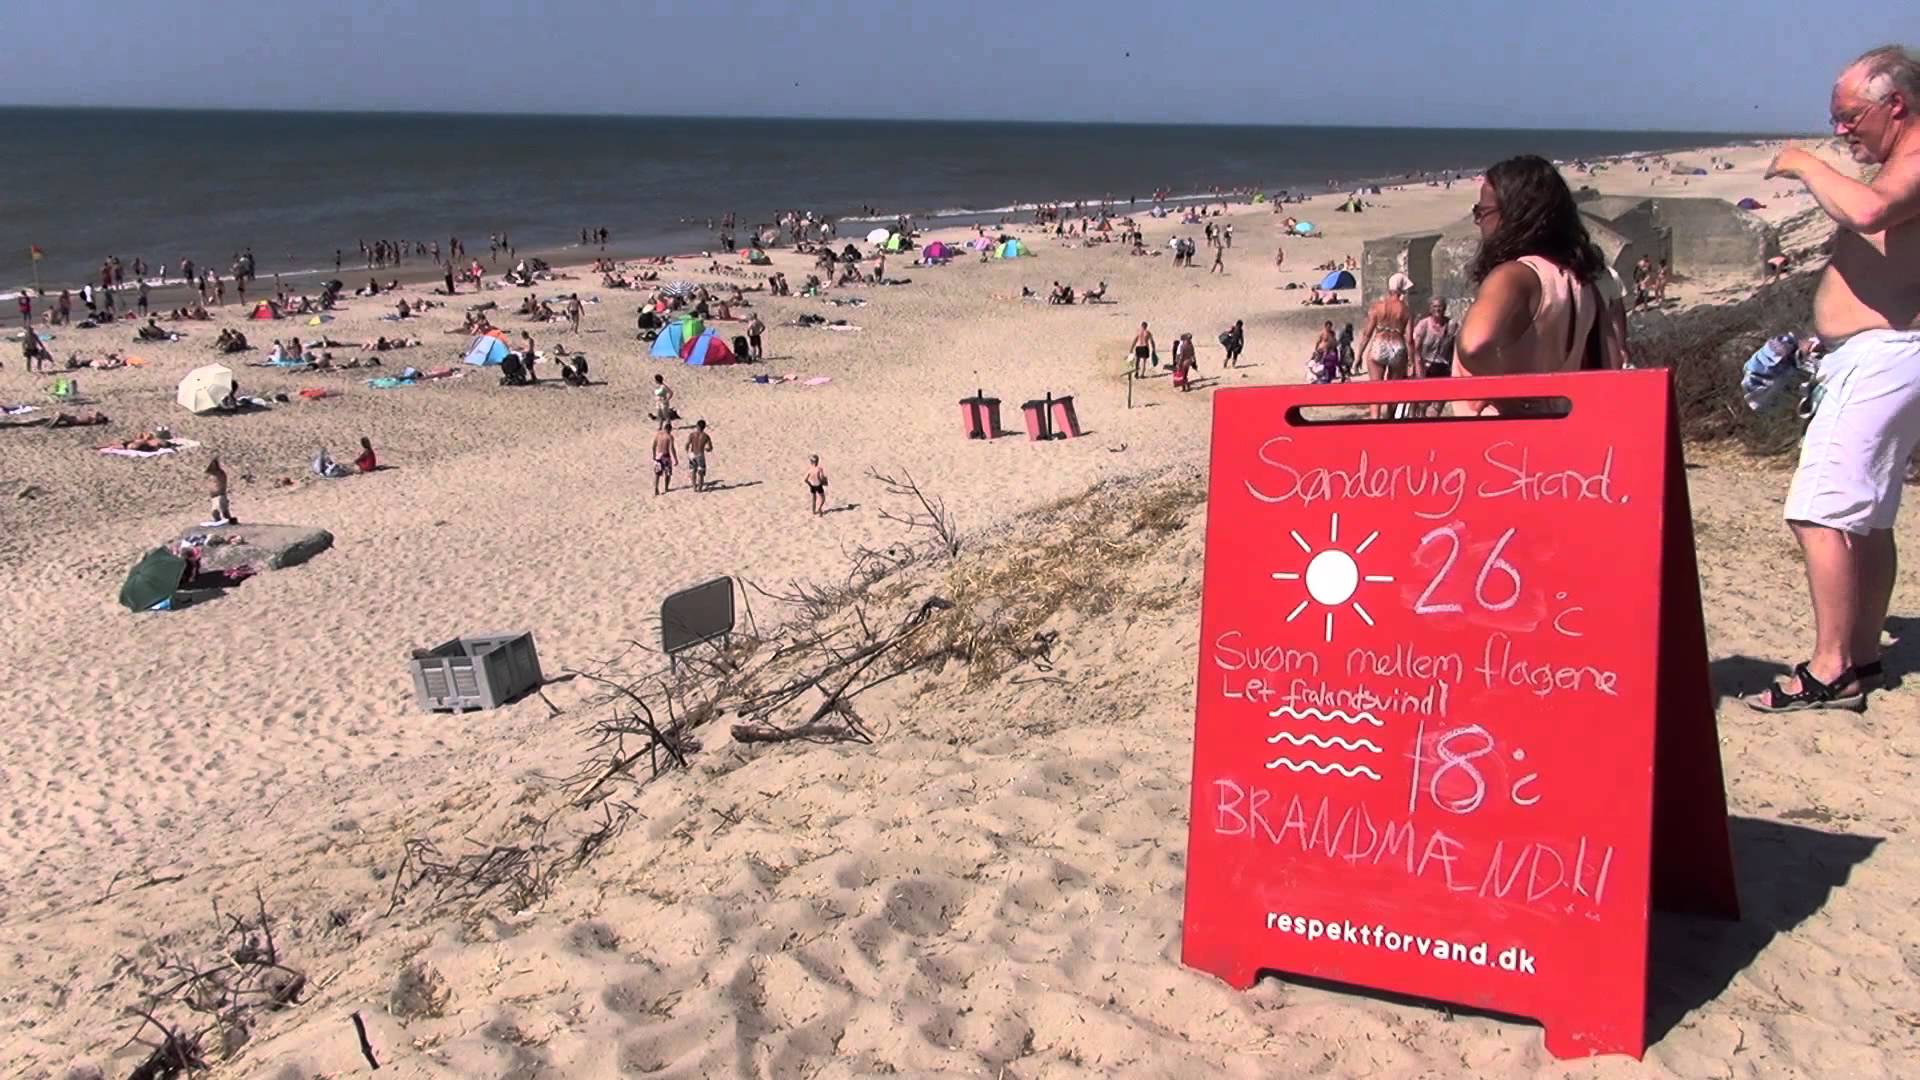 August heatwave in Denmark with crowded beaches - YouTube